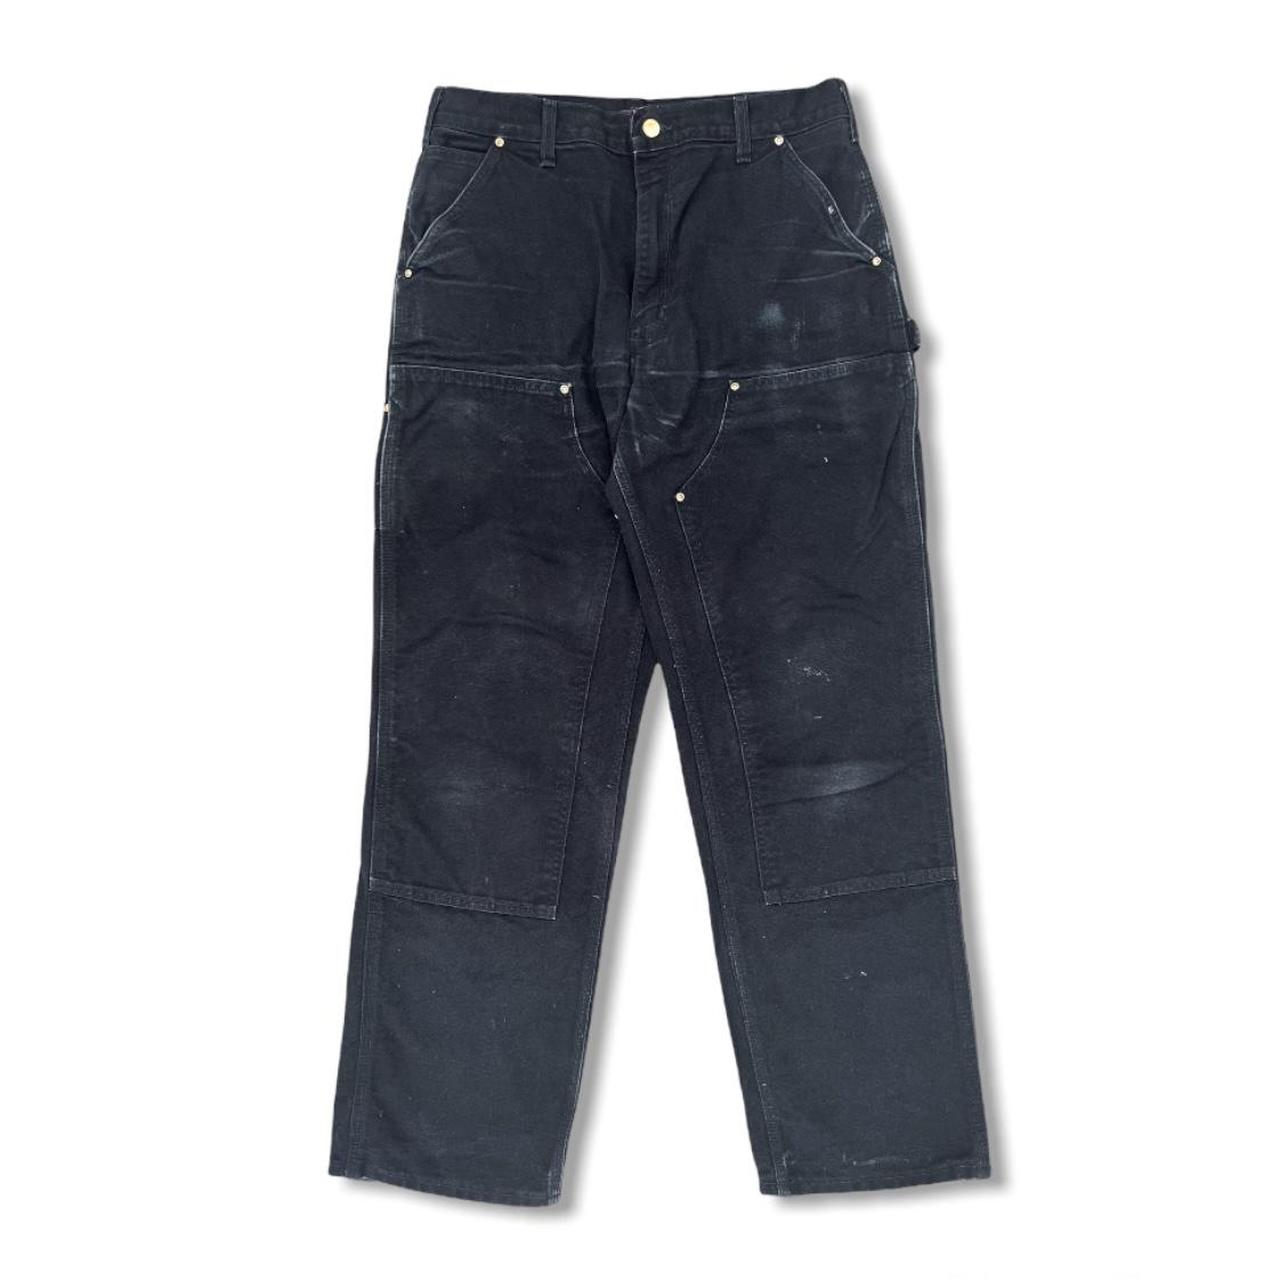 Product Image 1 - Vintage Carhartt Work Pants Double